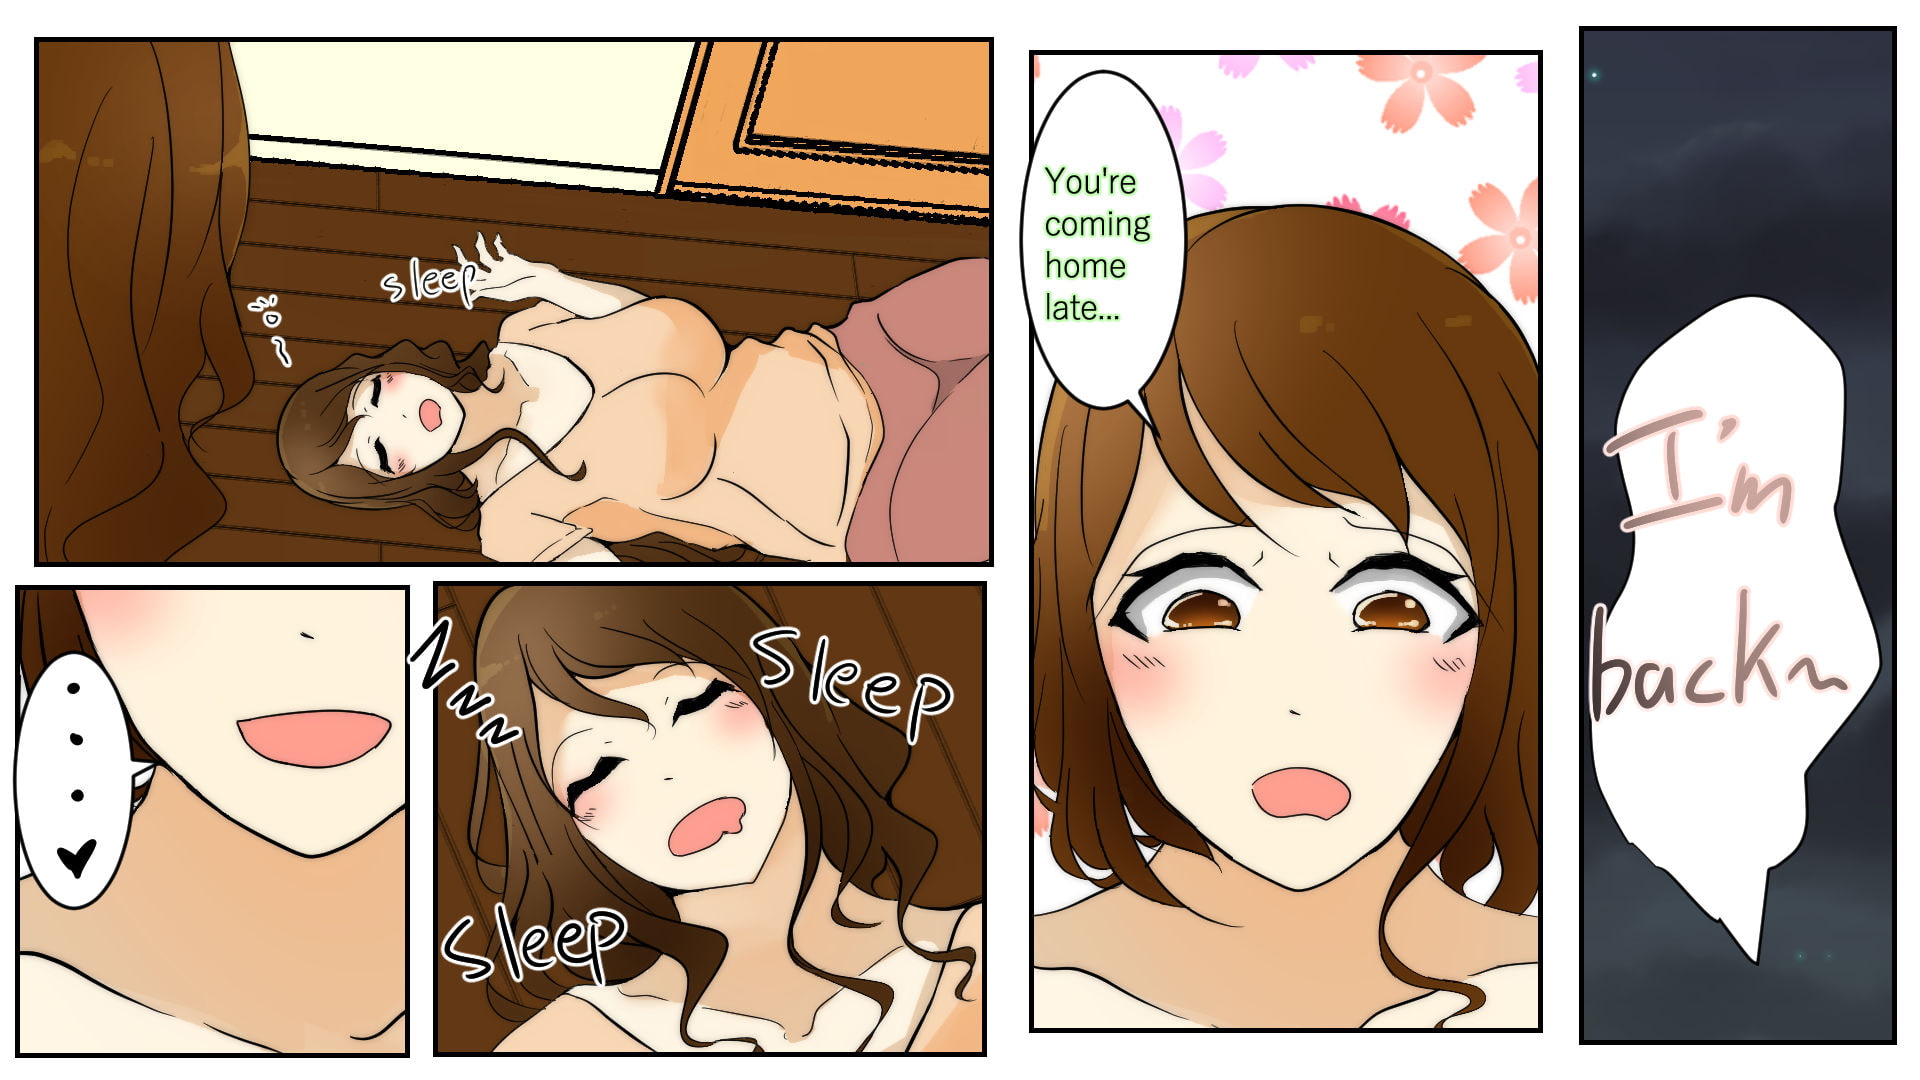 Her Big Sister Passed Out From Drinking, So She Sexually Assaulted Her (English ver.)